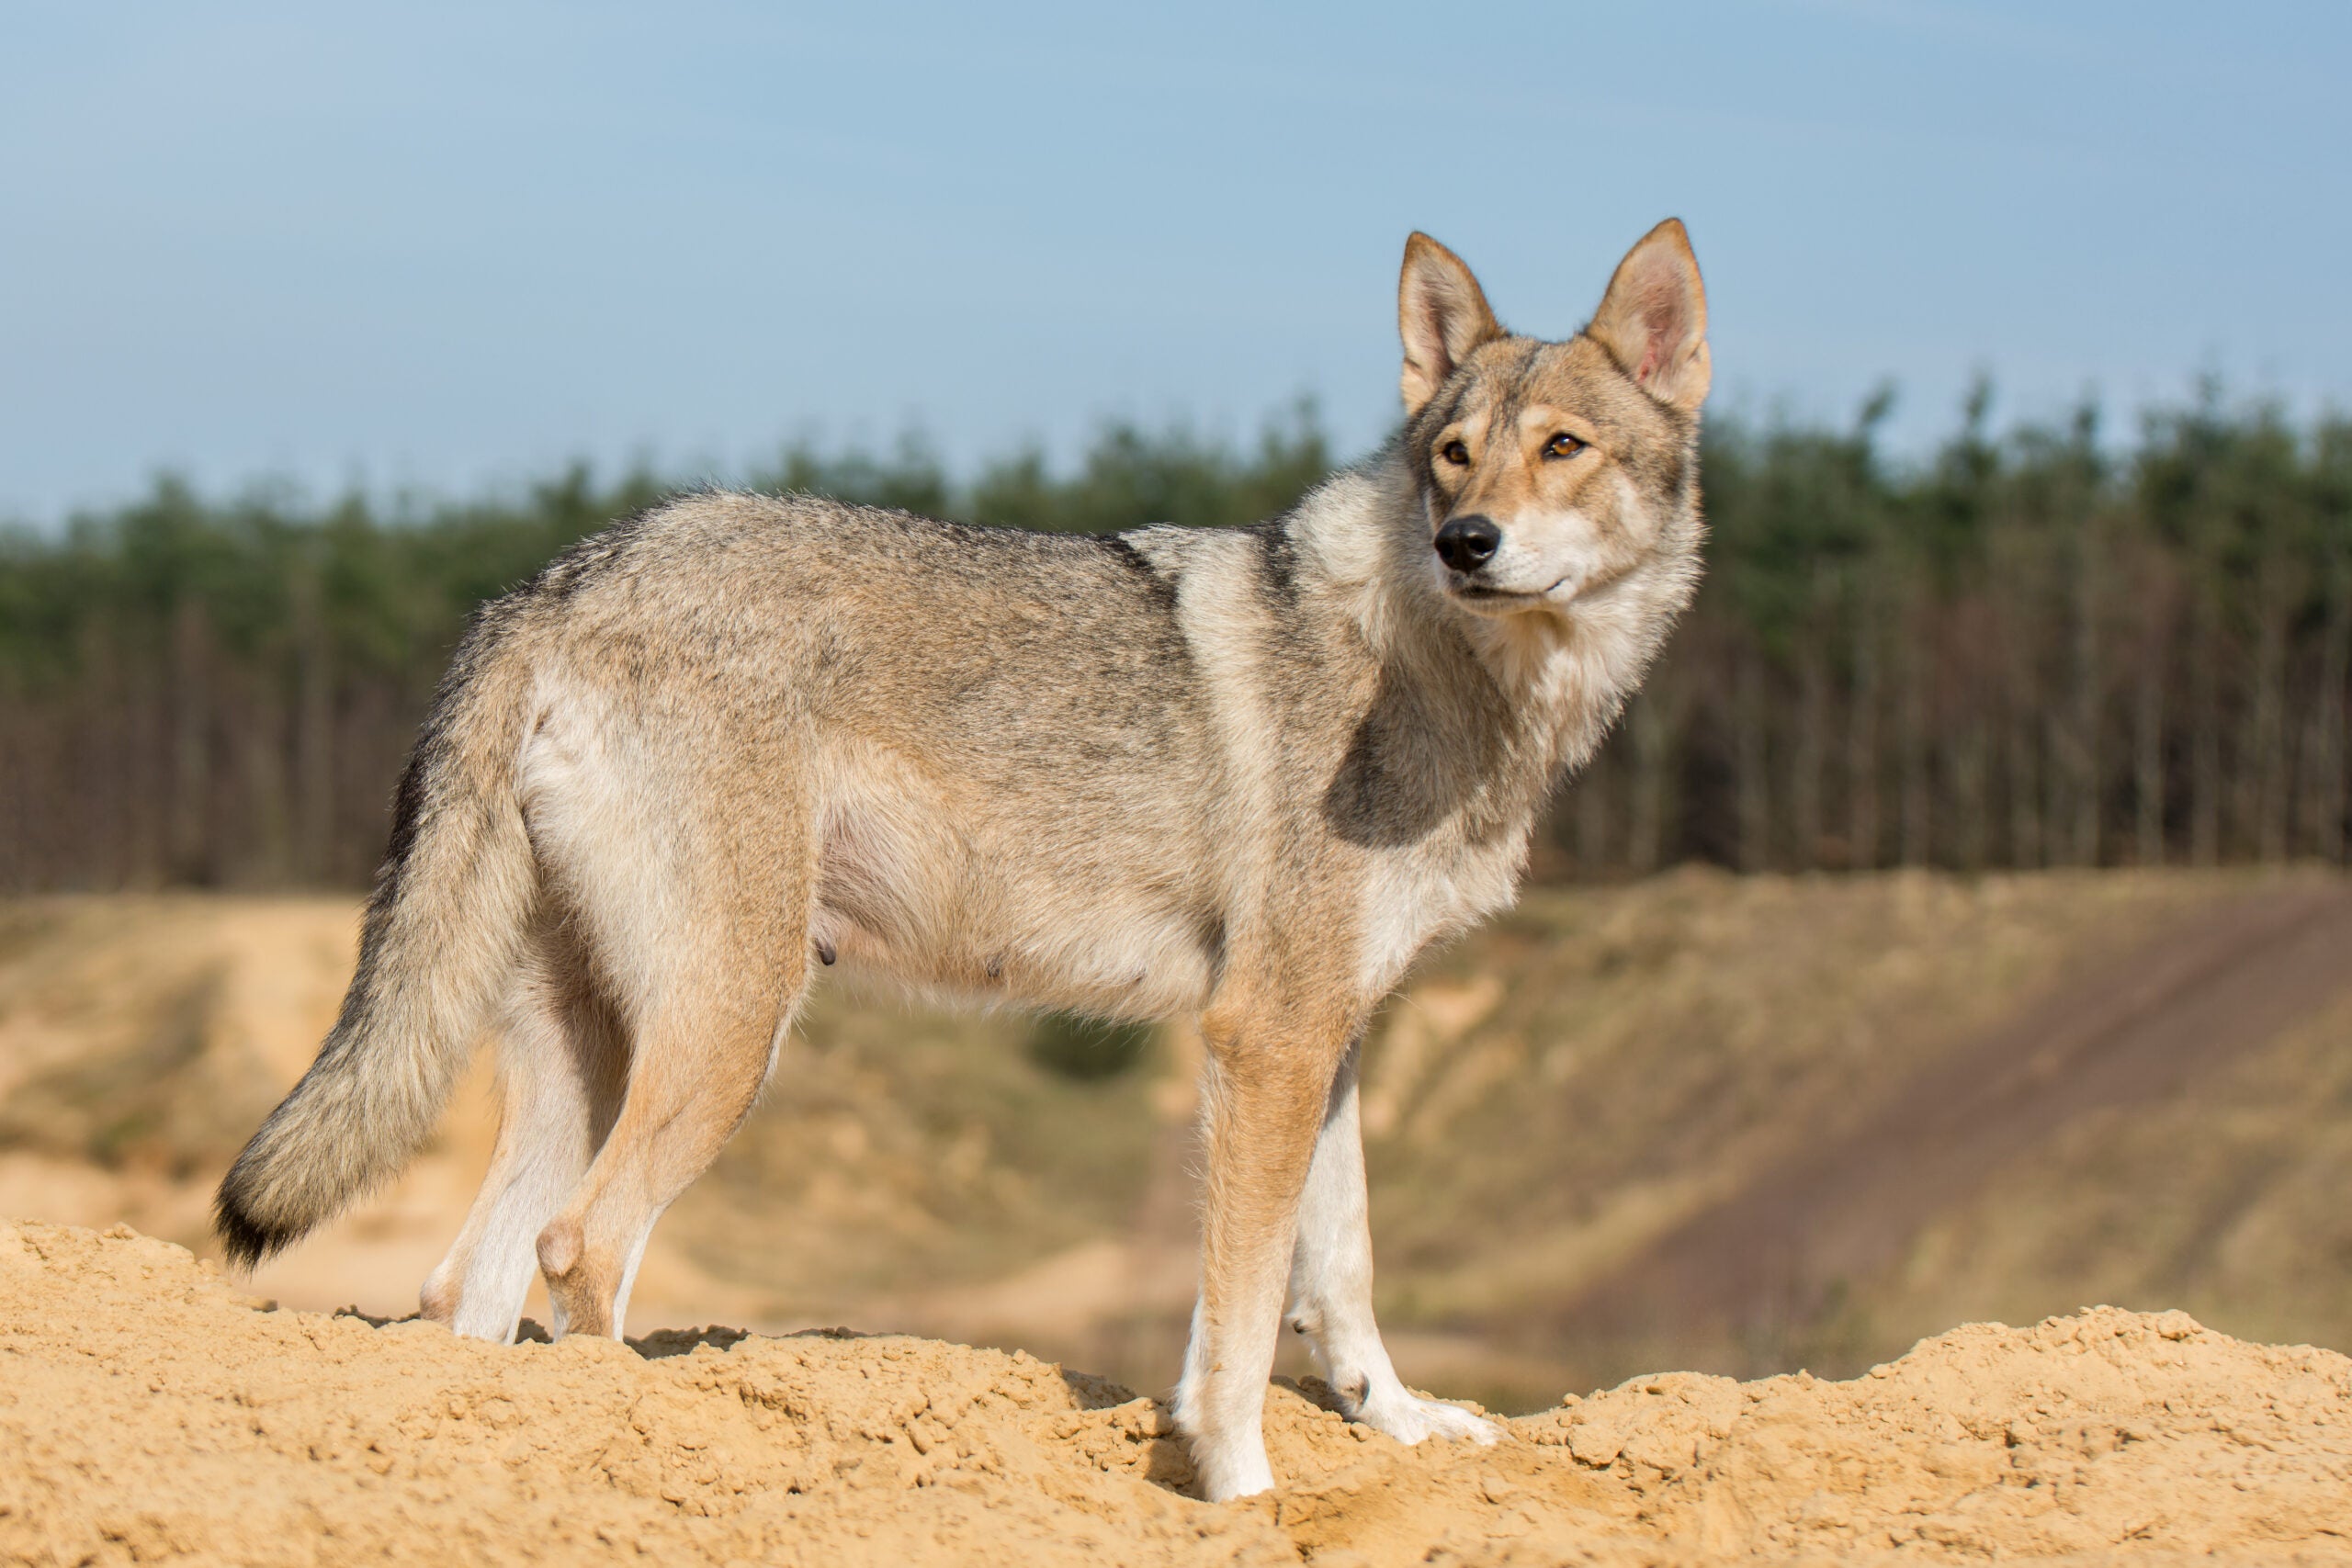 A Tamskan dog stands on a sandy berm, looking very much like coyote